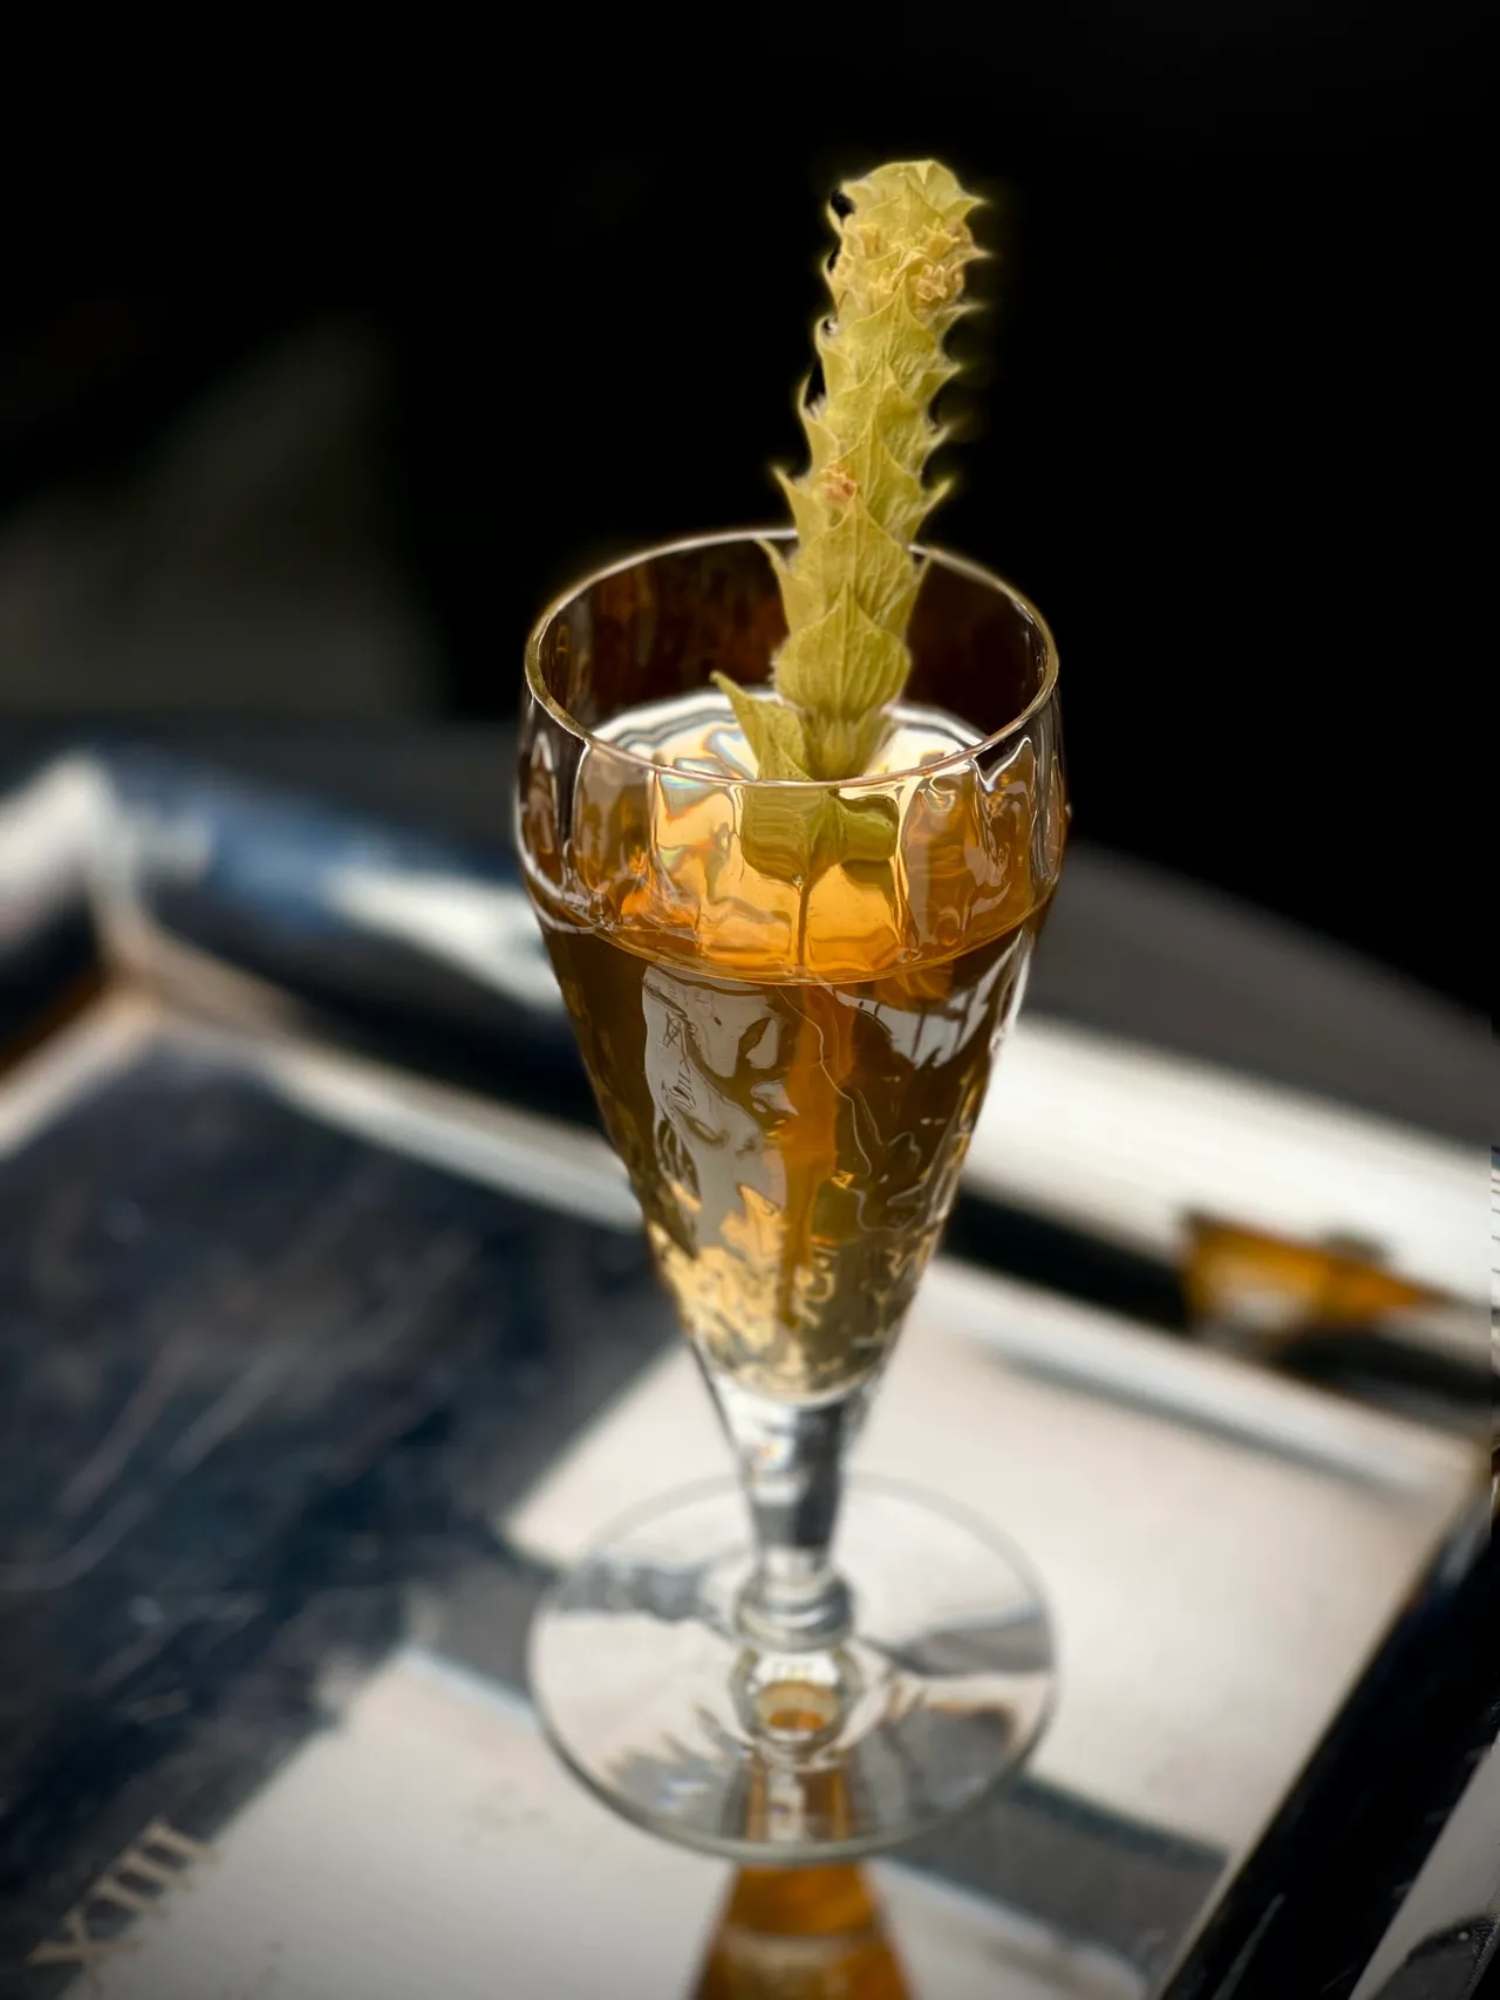 There is a cocktail in a glass on a bar.